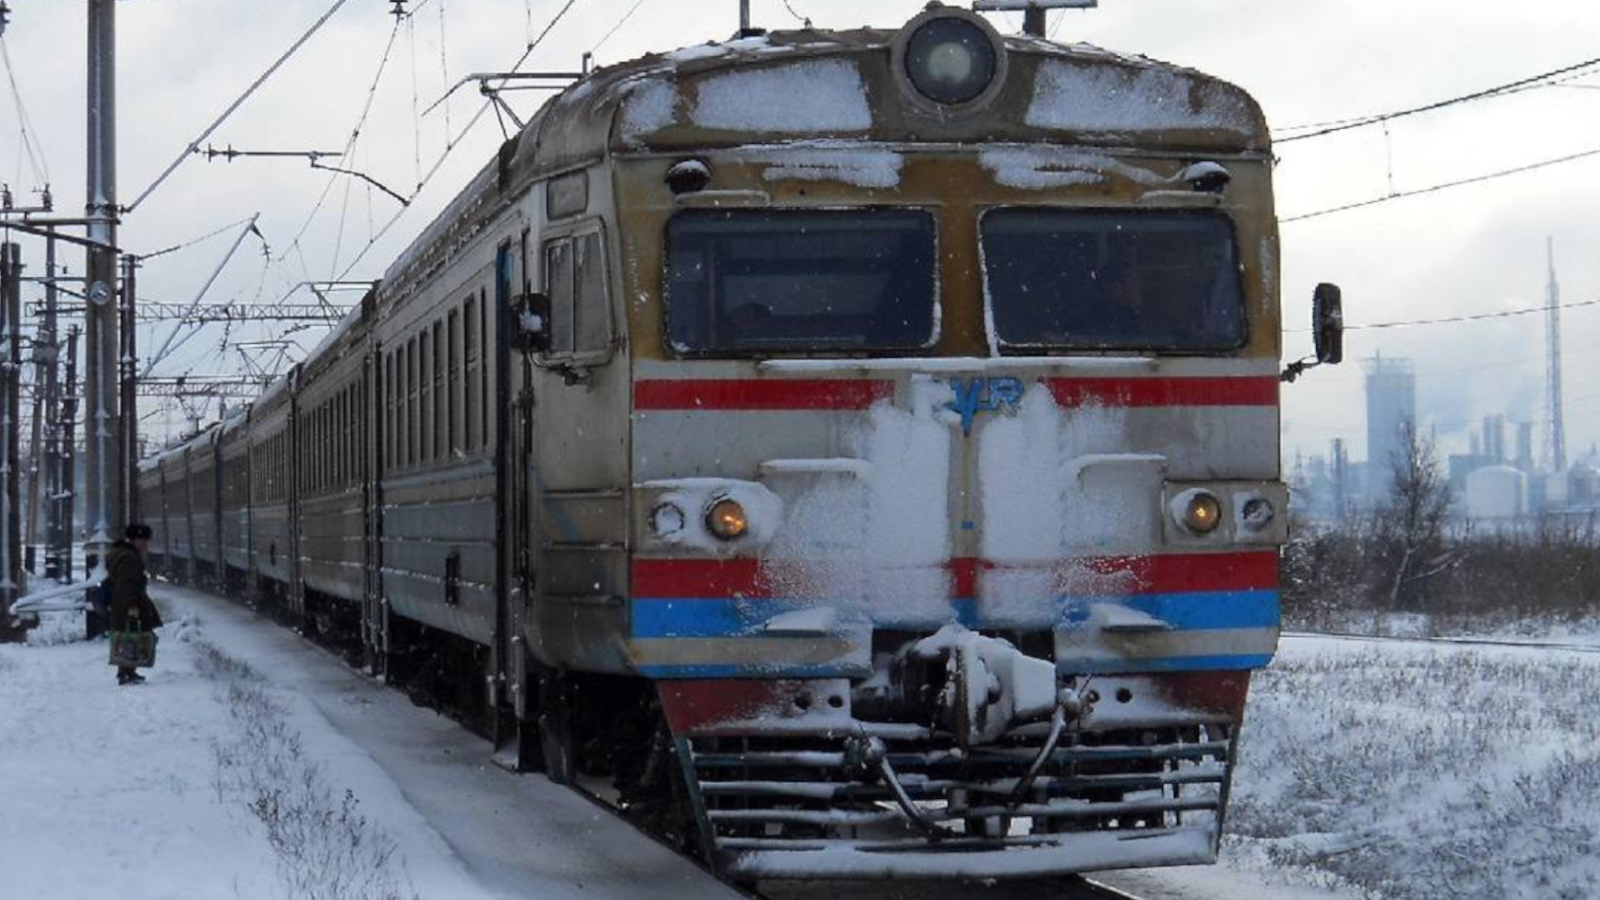 Yuriy Zaitsev suddenly discovered, it turns out, that in Mari El, there is no suburban railway communication in winter